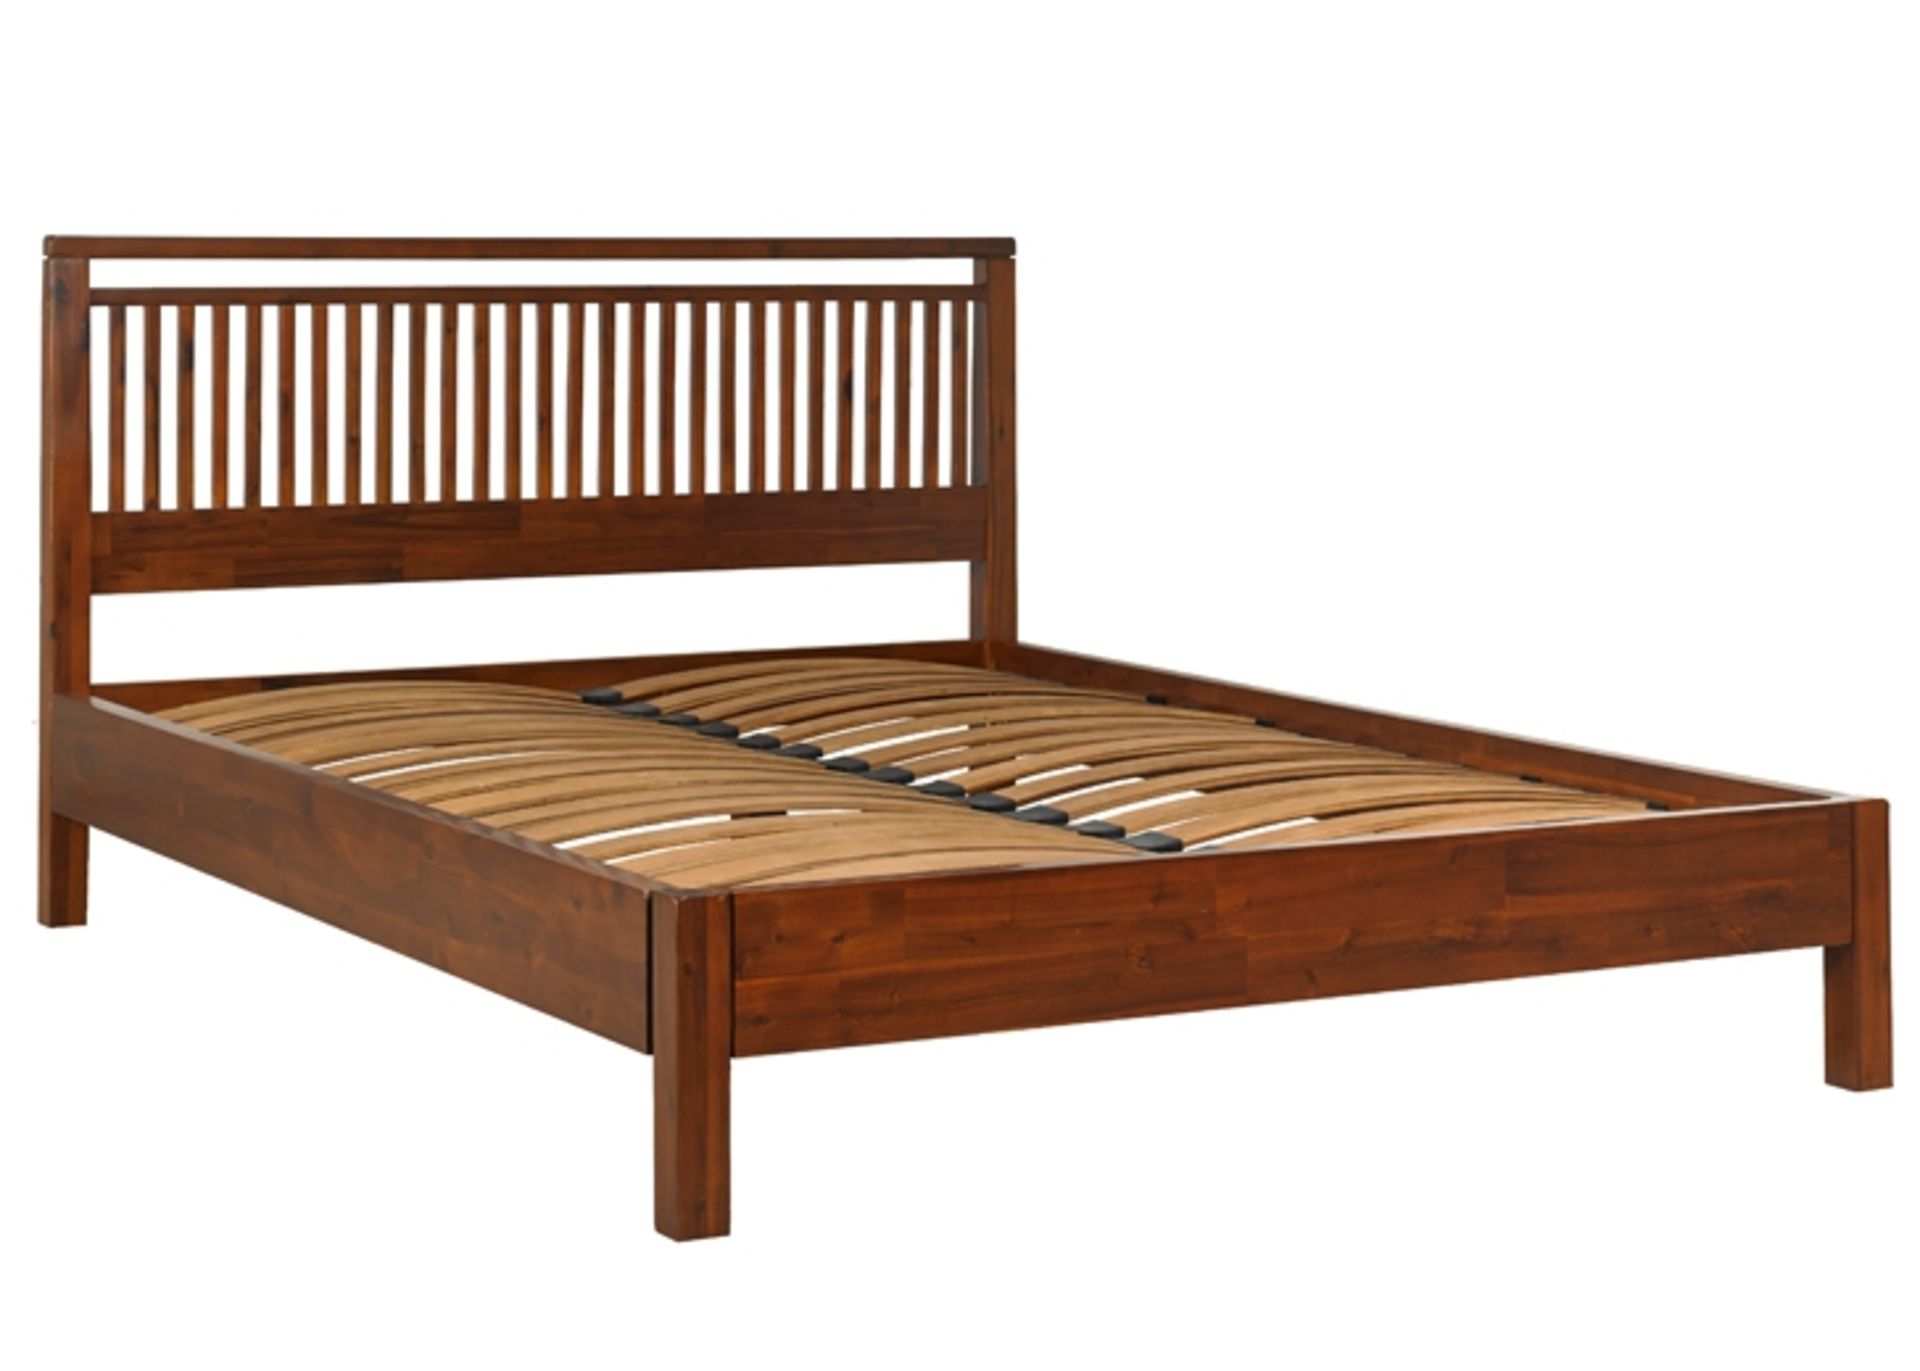 1 x Mark Webster Korutla 6ft King Size Bed Frame - Beautifully Crafted From Solid Acacia Wood -